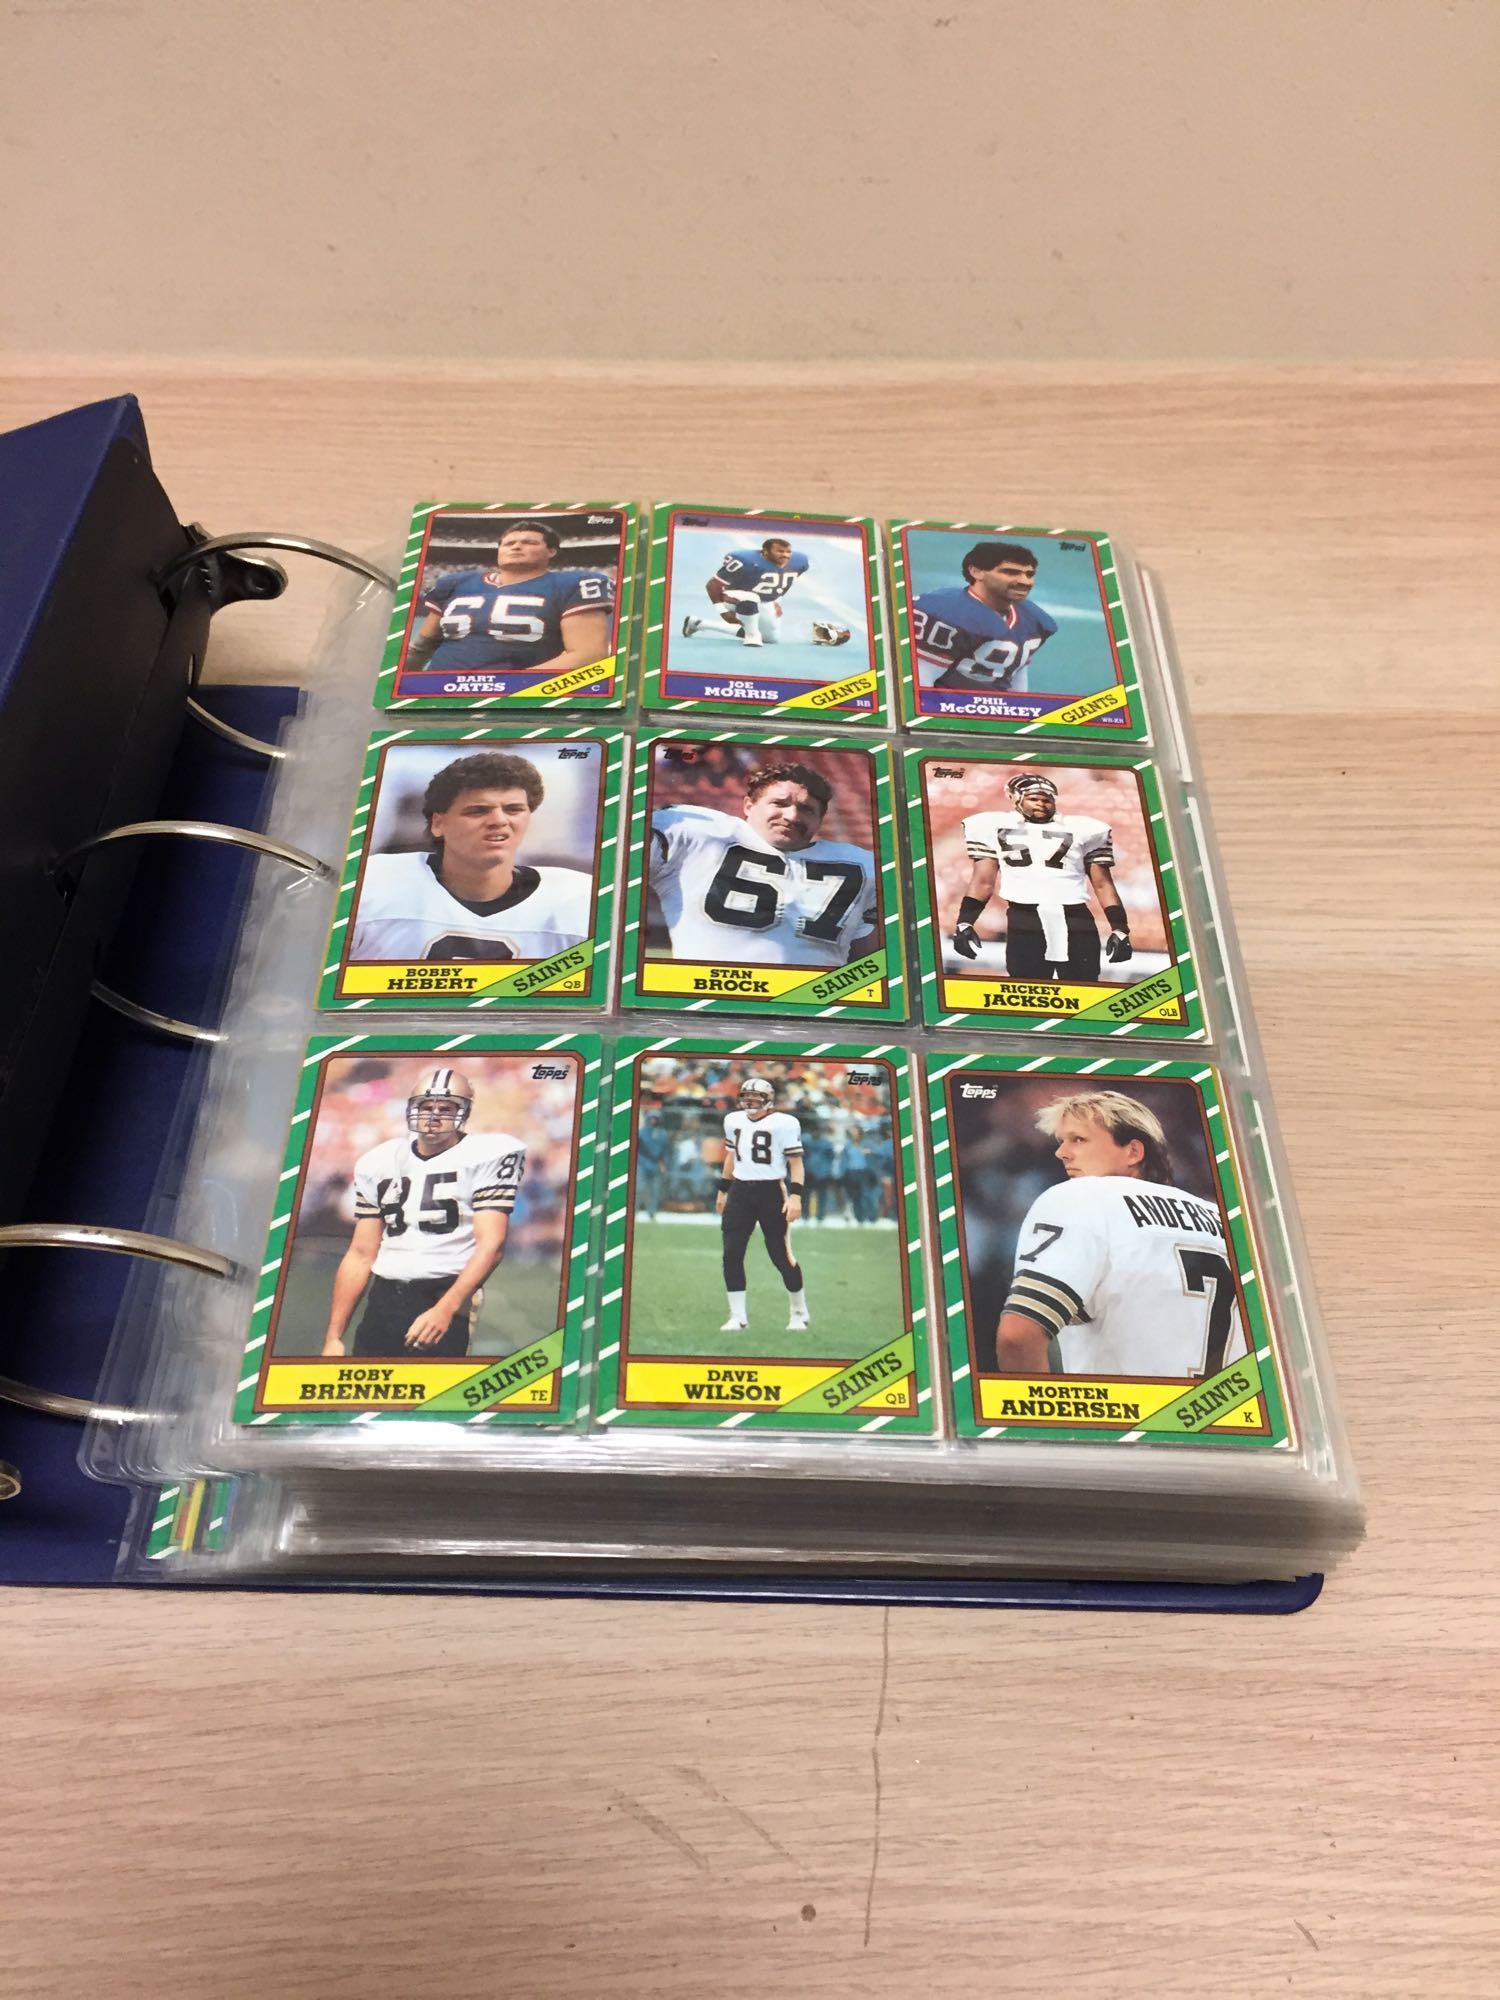 Huge Binder Full of Early-Mid 1980s Football Cards with Rookies from Estate - WOW